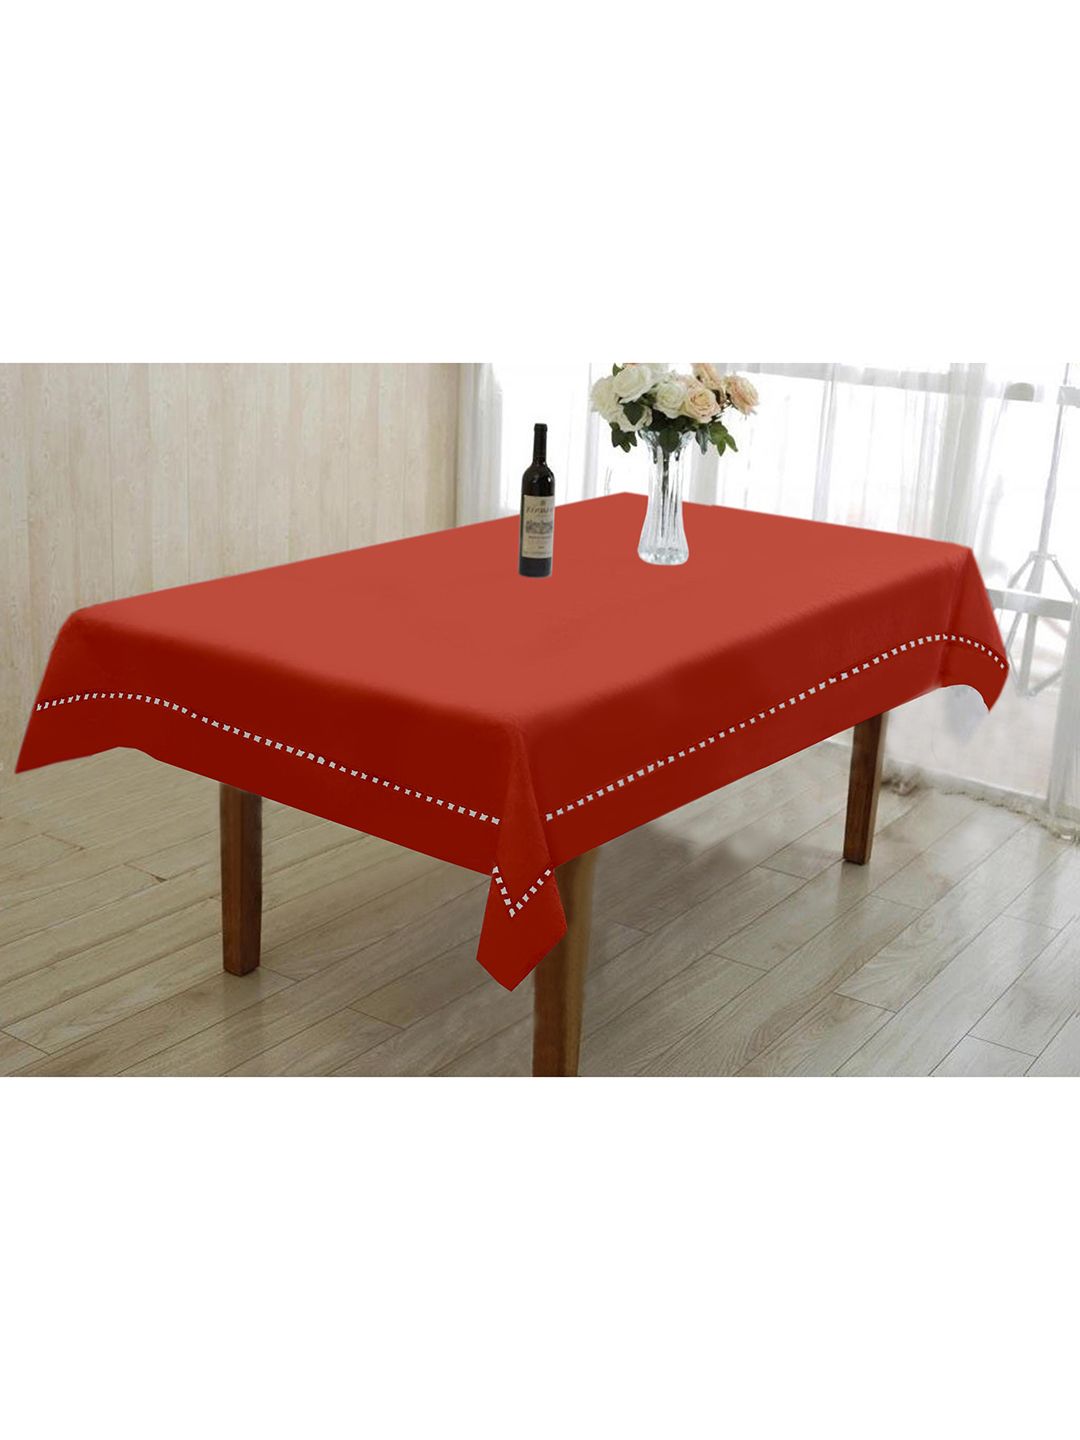 Lushomes Red 6 Seater Dining Table Price in India